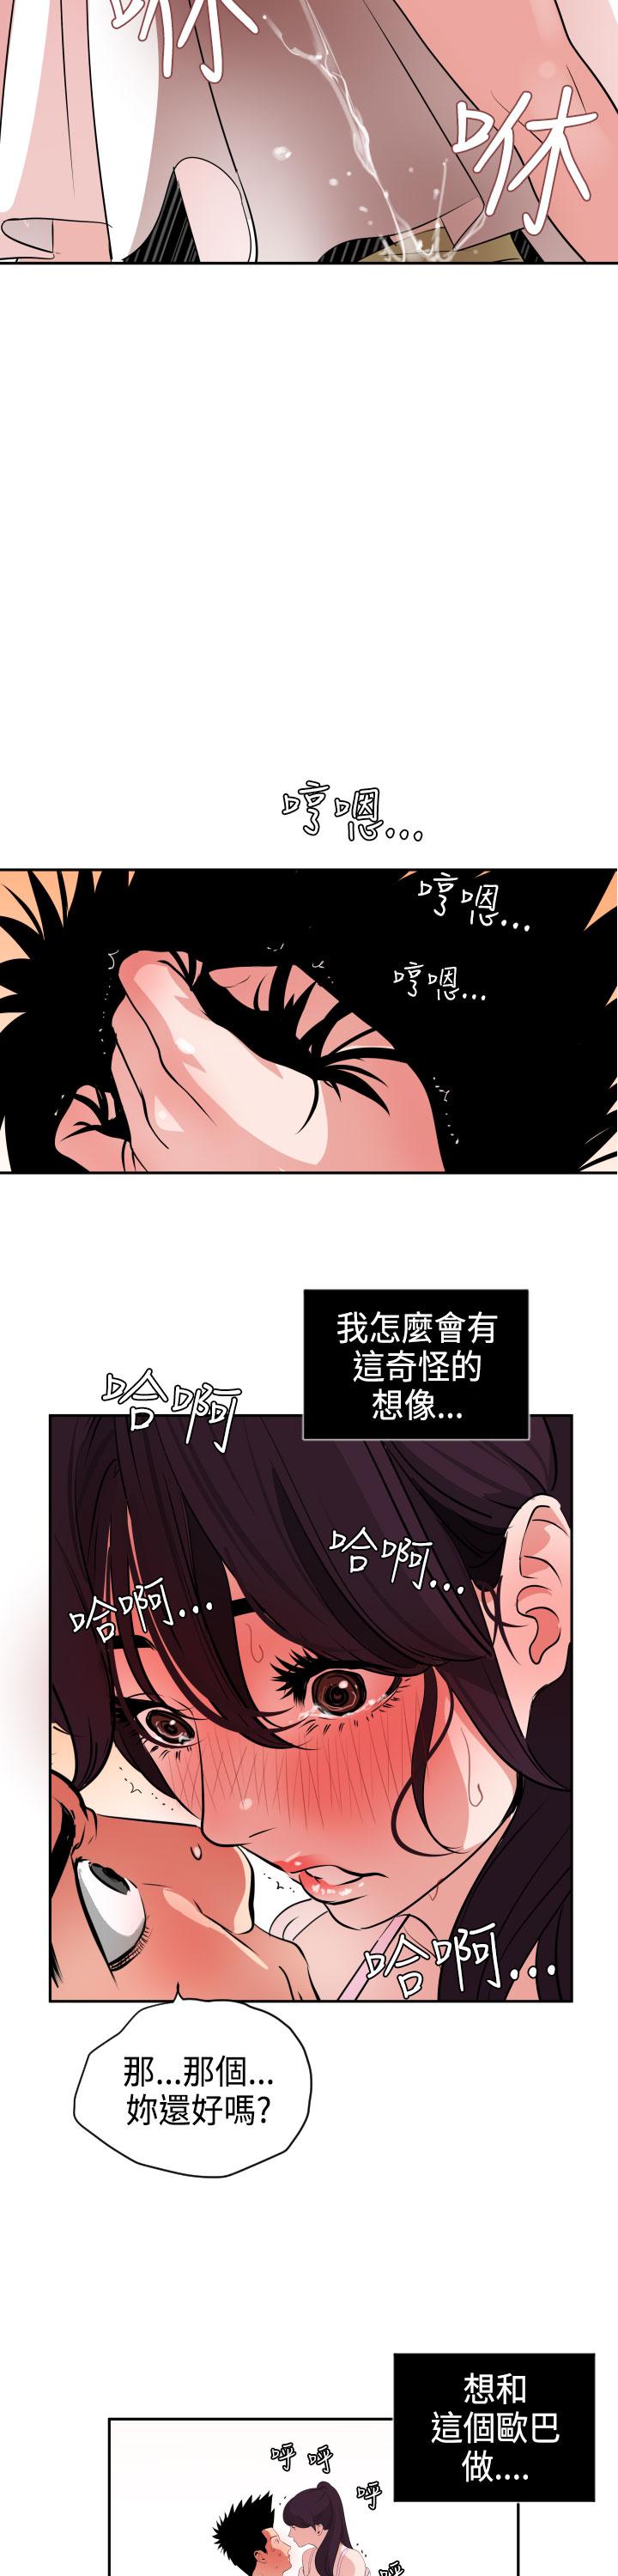 Desire King (慾求王) Ch.1-16 (chinese) 358